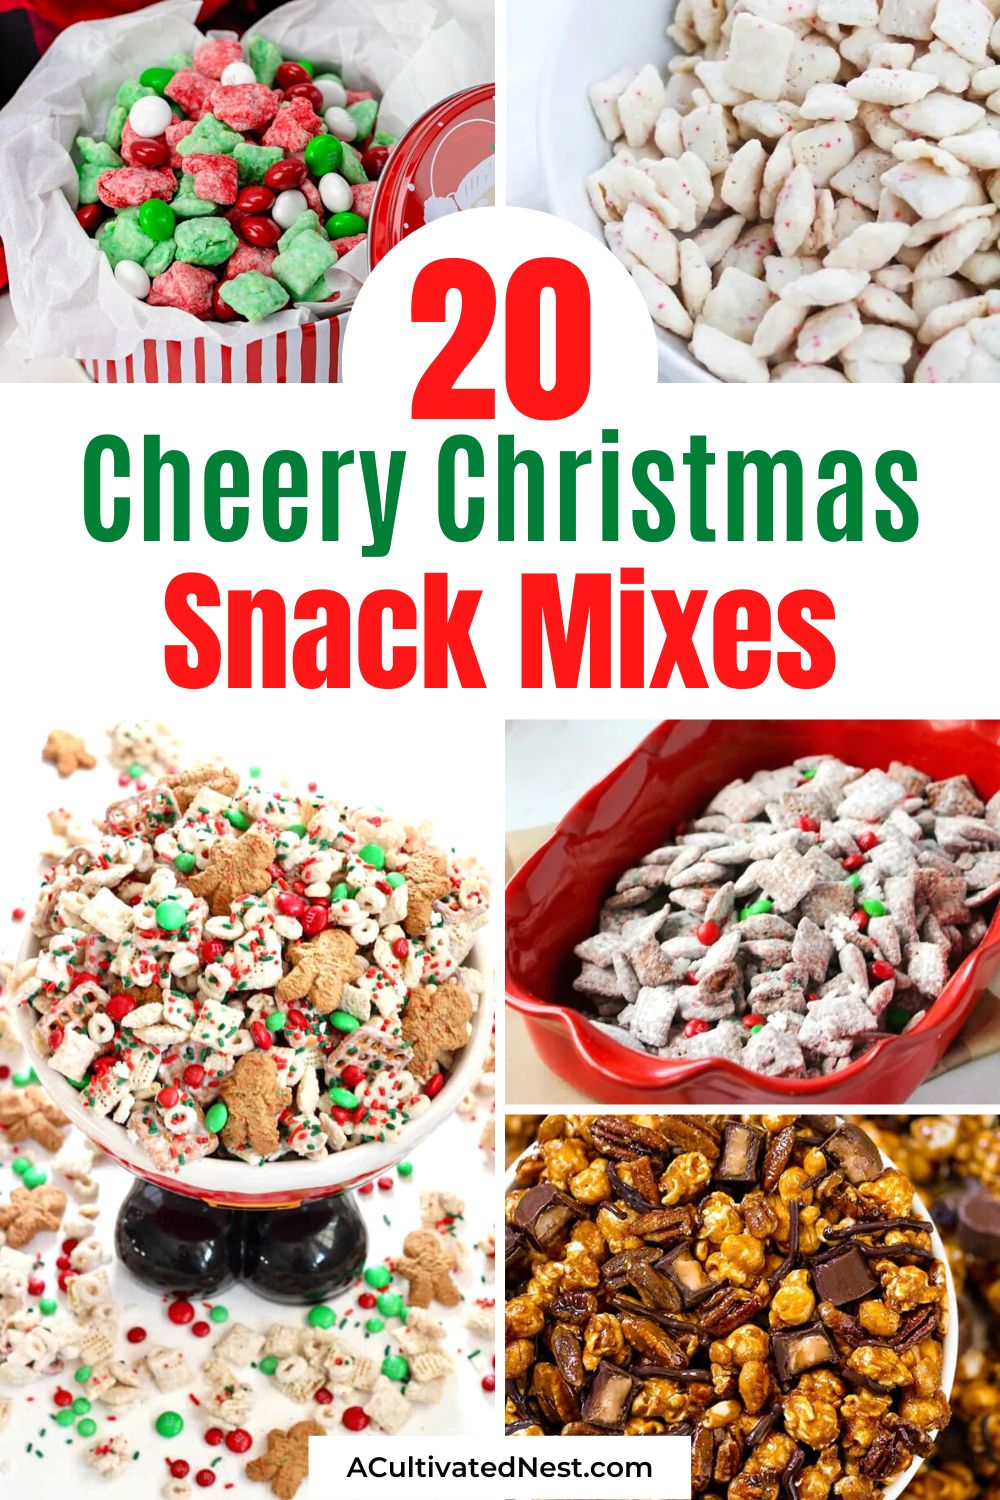 20 Cheery Christmas Snack Mix Recipes- You can always be ready for surprise holiday guests if you have some tasty snack mixes on hand! These Christmas snack mix recipes that are easy to make, tasty, and can be made ahead of time! | homemade Christmas snacks, homemade holiday snack recipes, #ChristmasRecipes #snackMixes #muddyBuddies #snackRecipes #ACultivatedNest